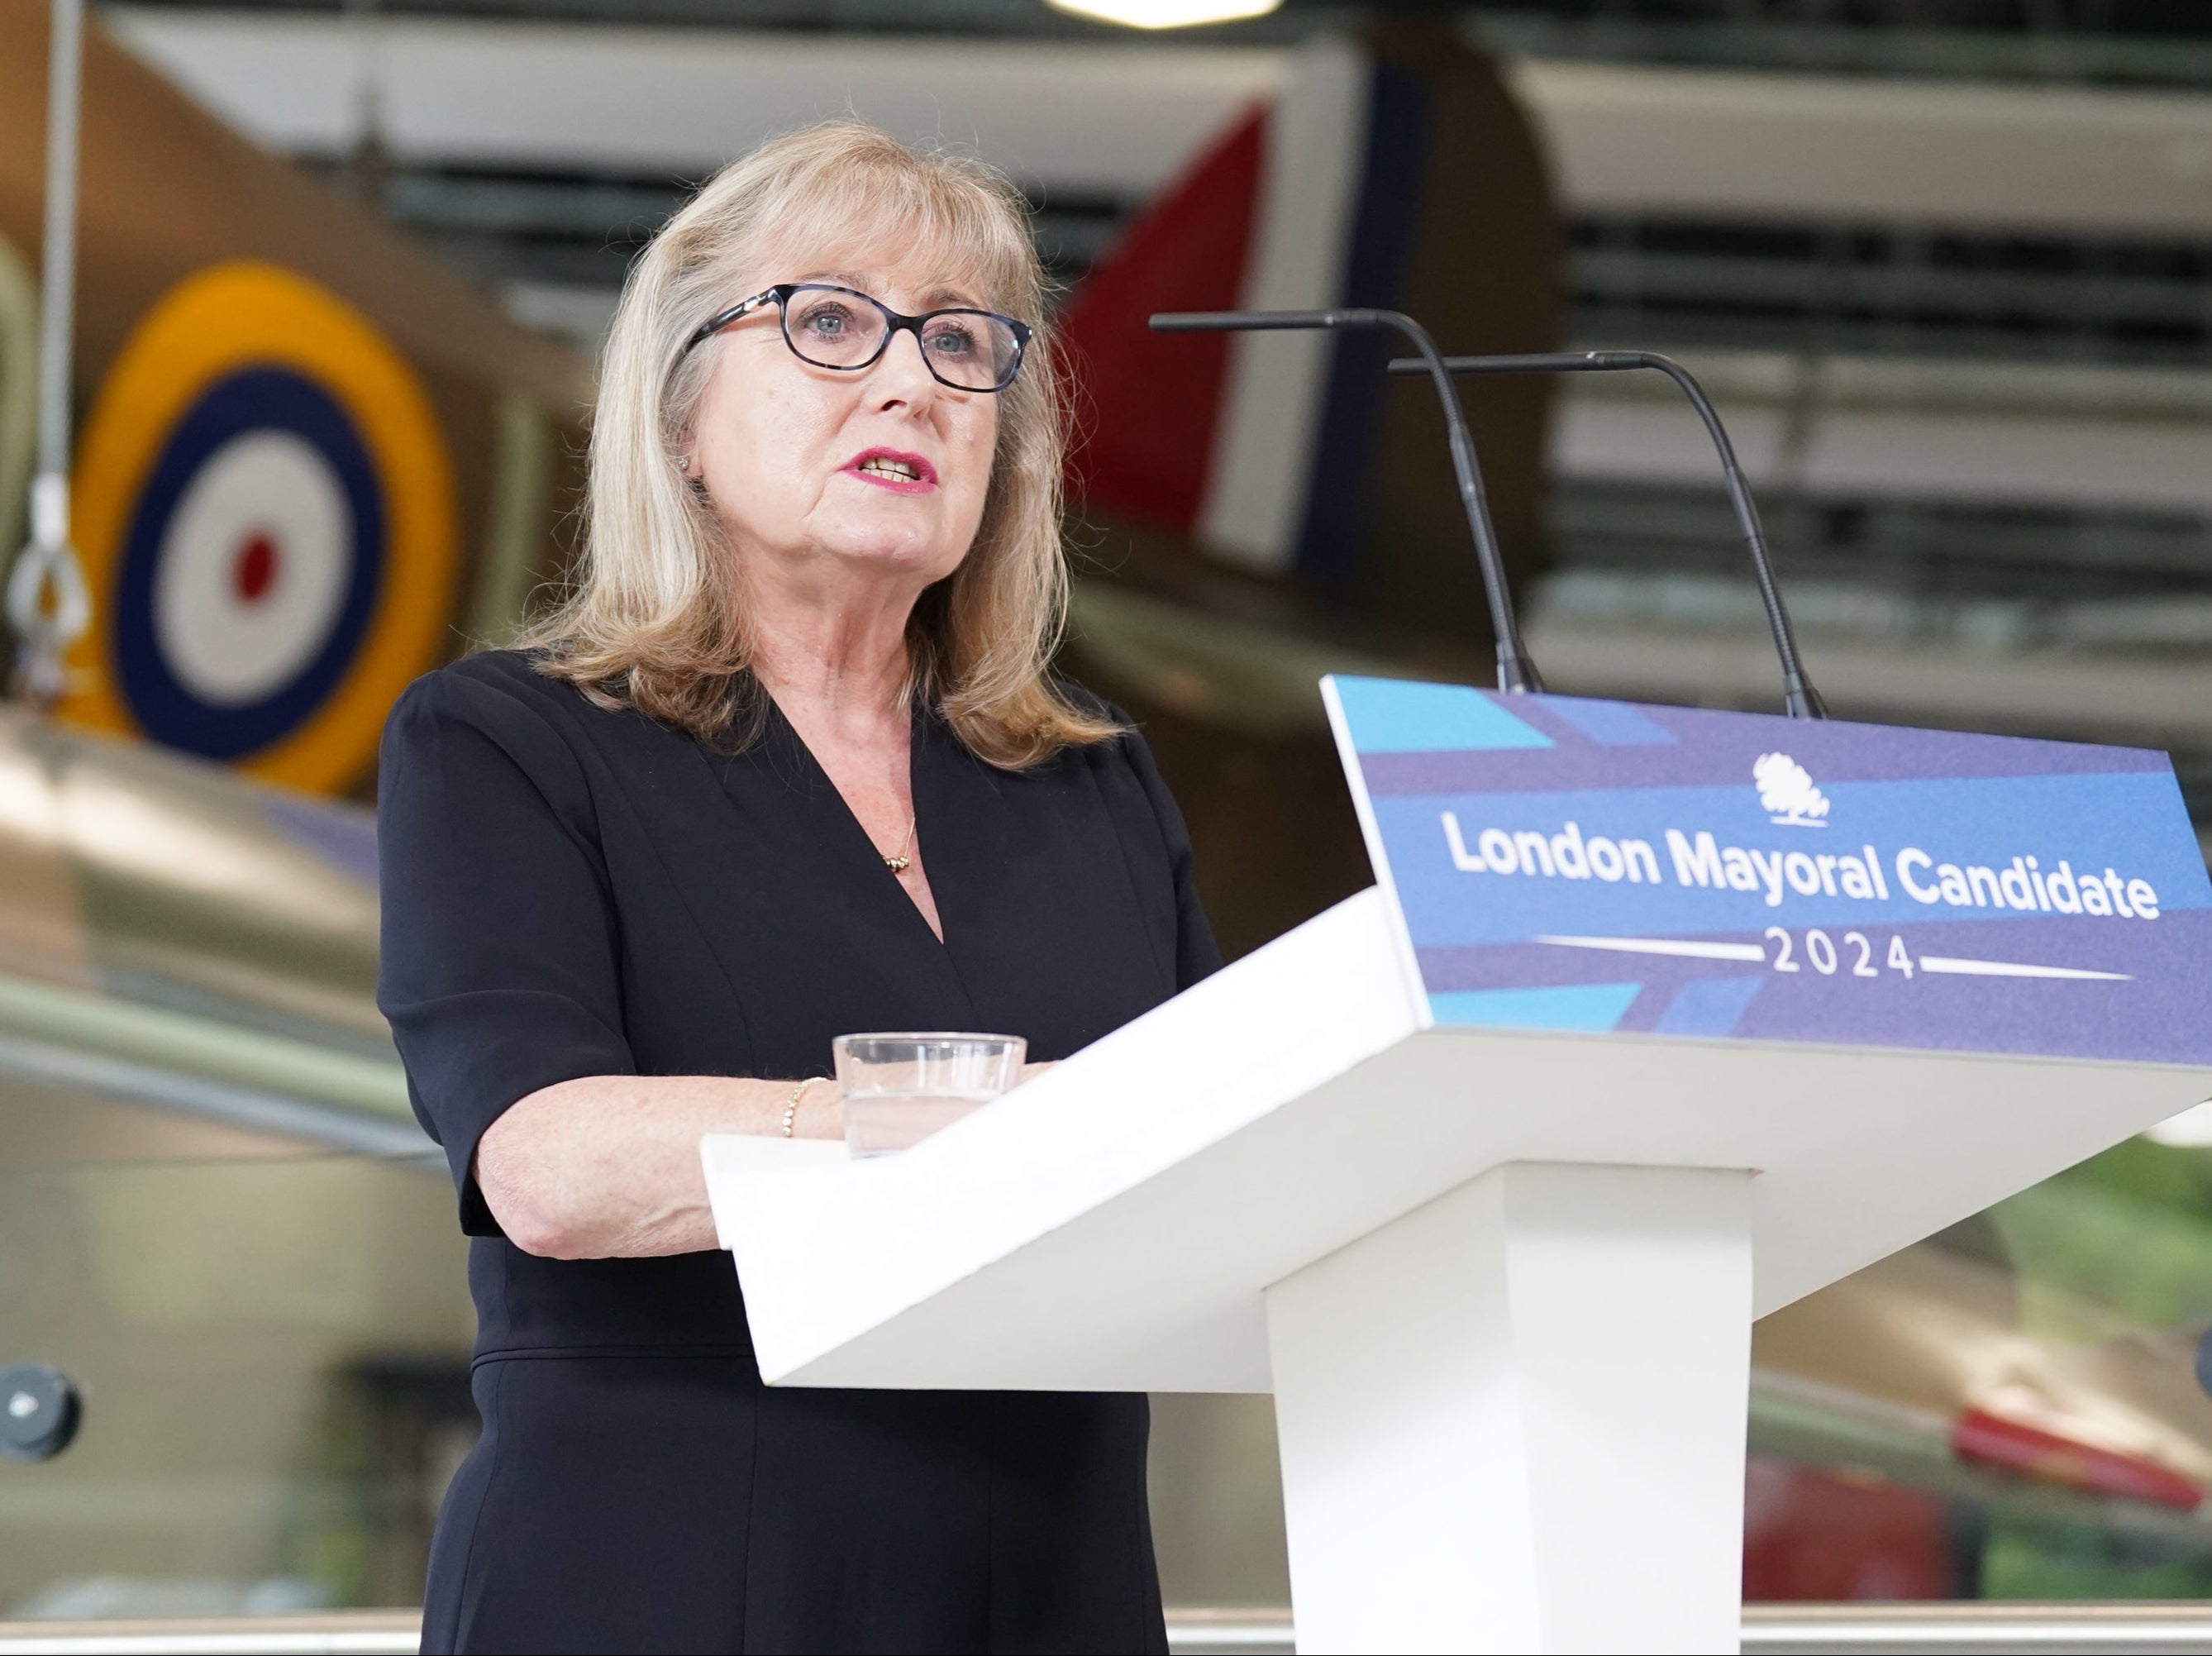 Susan Hall speaks to the media at the Battle of Britain Bunker in Uxbridge, west London, after being named as the Conservative Party candidate for the Mayor of London election in 2024